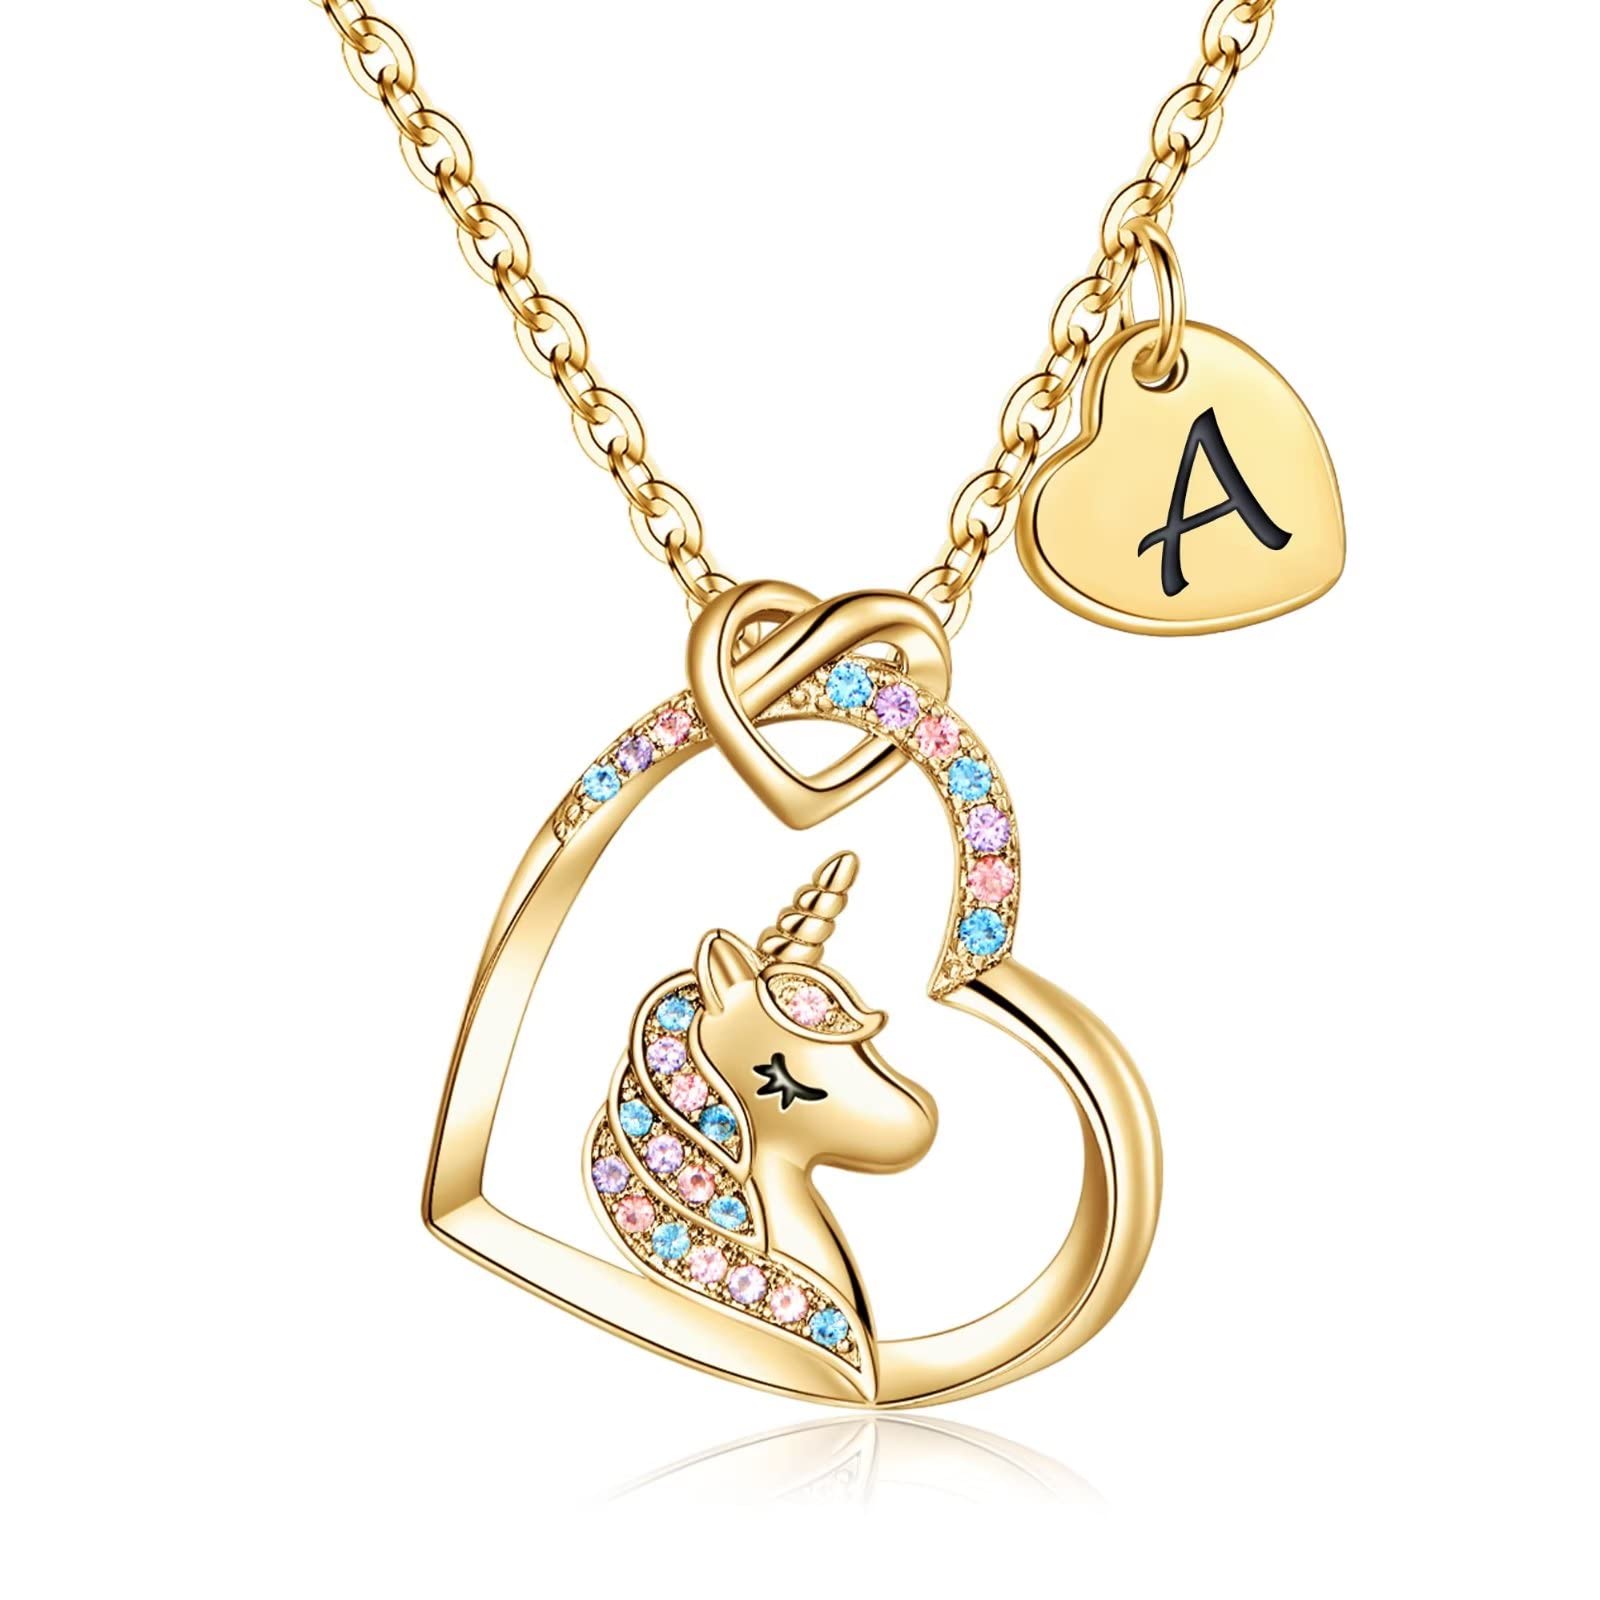 Hidepoo Unicorns Gifts for Girls - 14K Gold/White Gold/Rose Gold Plated Colorful CZ Heart Pendant Unicorn Necklaces for Girls Jewelry Initial Unicorn Necklace Birthday Gifts Unicorn Gifts for Girls